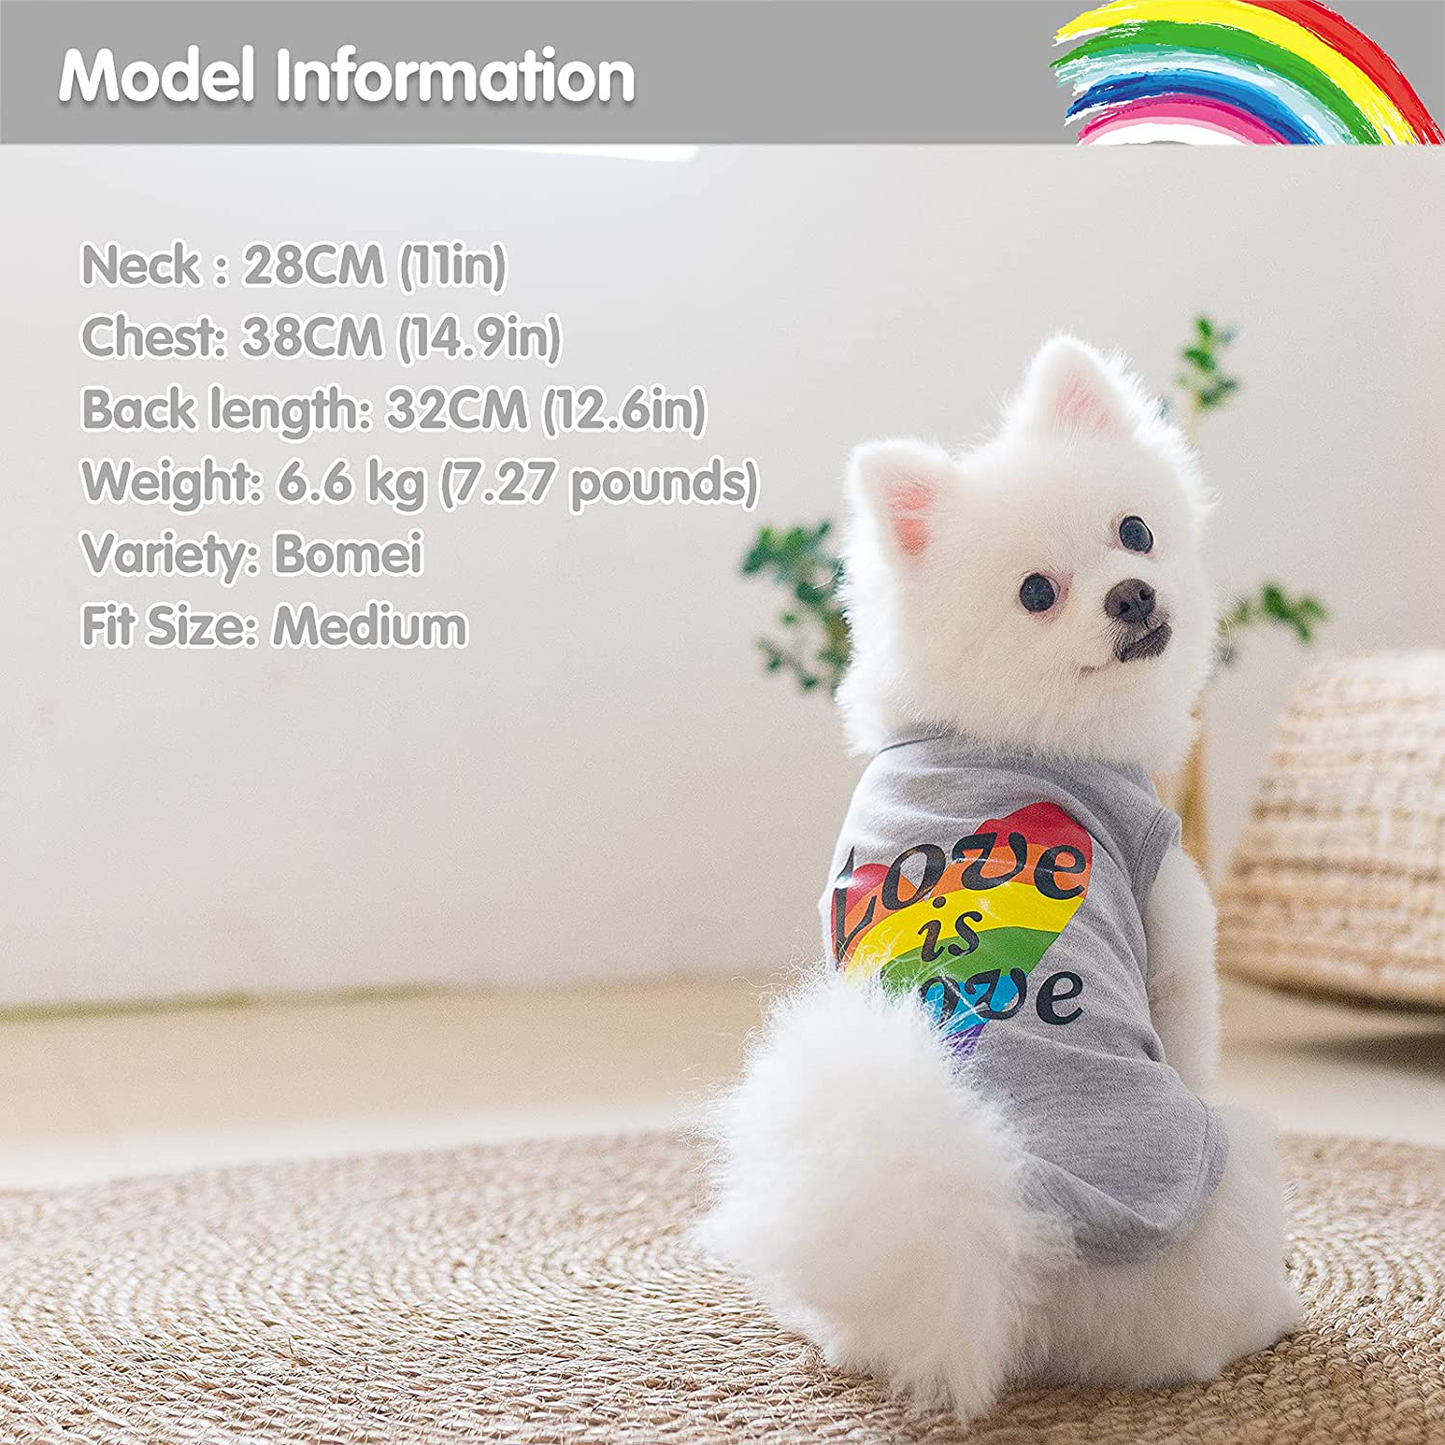 Dog Shirt Breathable Puppy Vest Pet Lovely Shirt Printed with Love Is Love Suitable for Small Medium Large Dog, Dog Shirts Apparel for Pet Dog